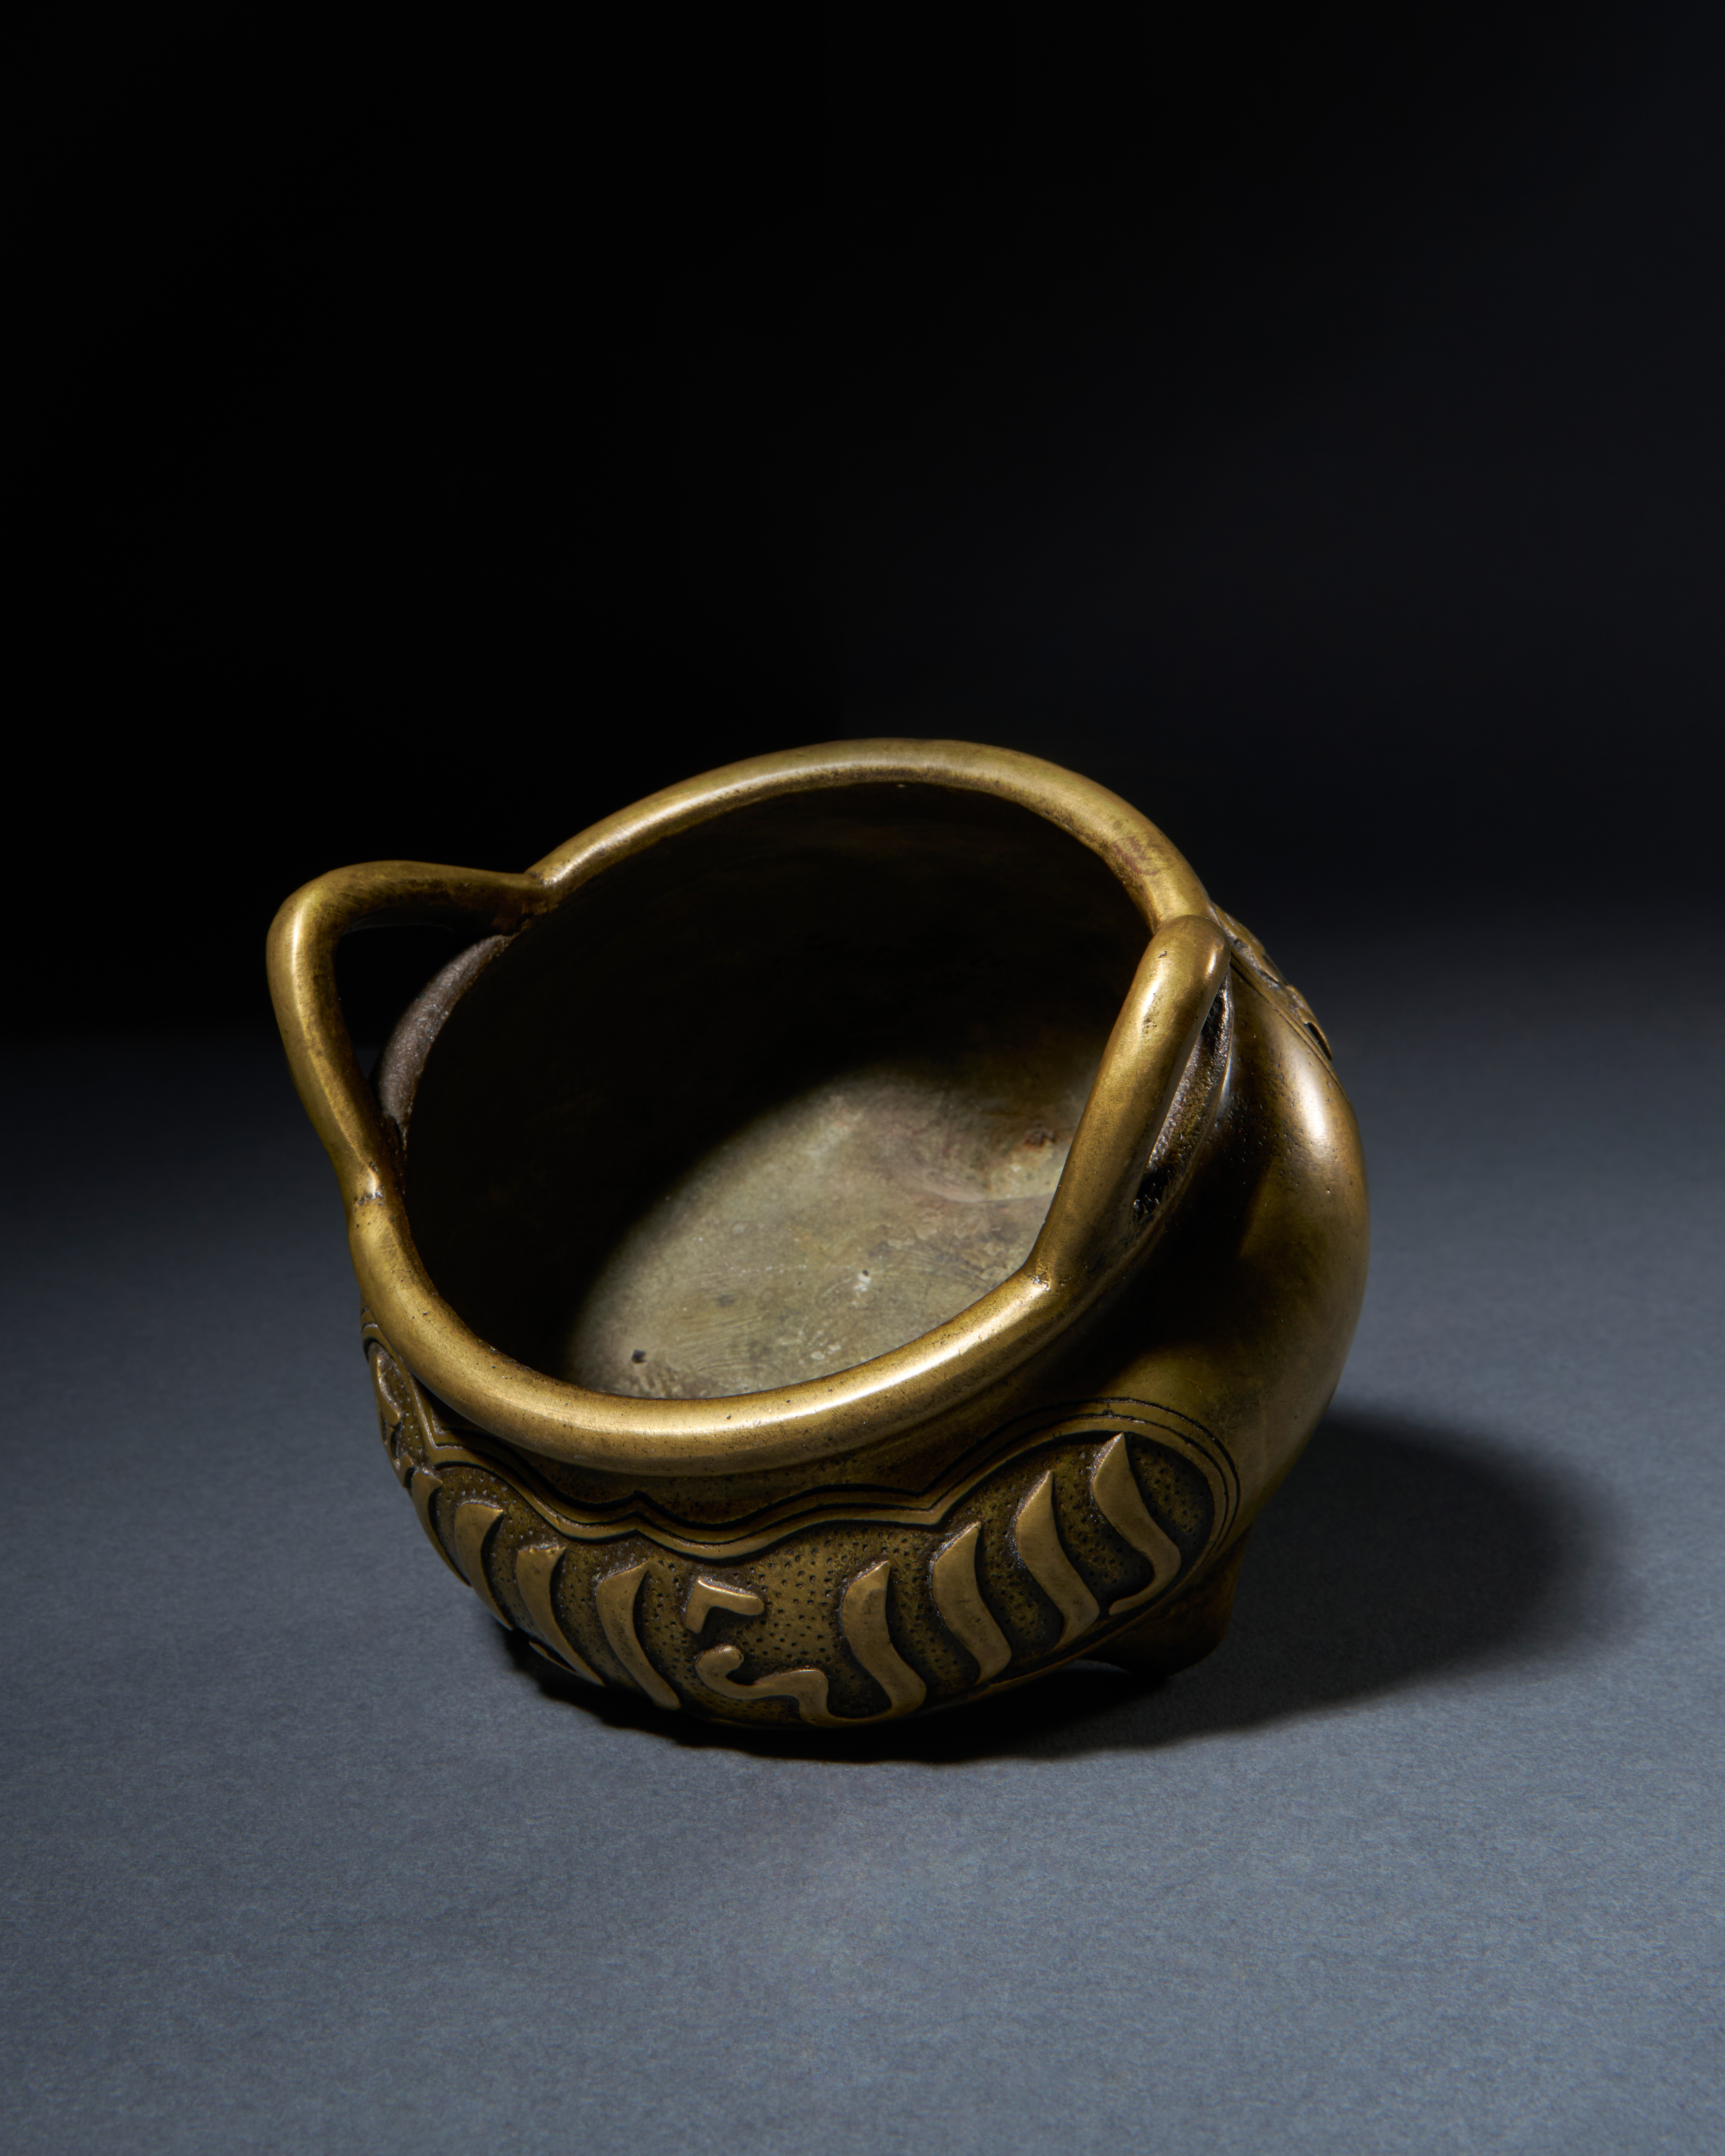 A BRONZE INCENSE BURNER WITH ARABIC INSCRIPTIONS, 17TH/18TH CENTURY - Image 4 of 4